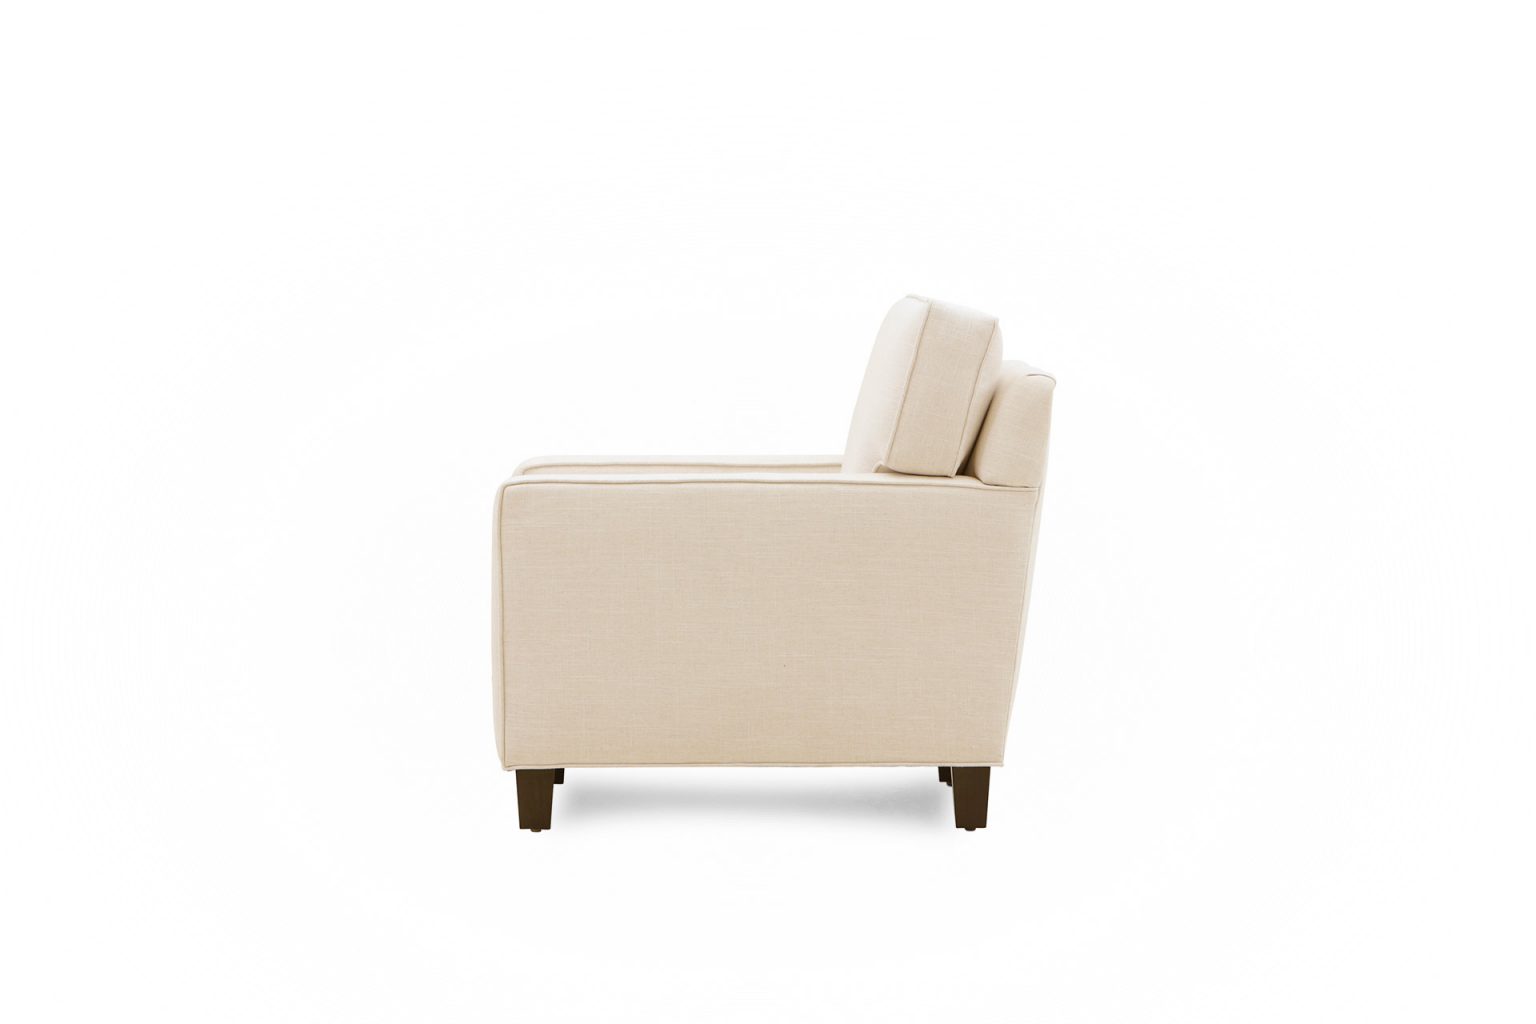 Belltown Chair - Tailored proportions and refined detailing gives the ...